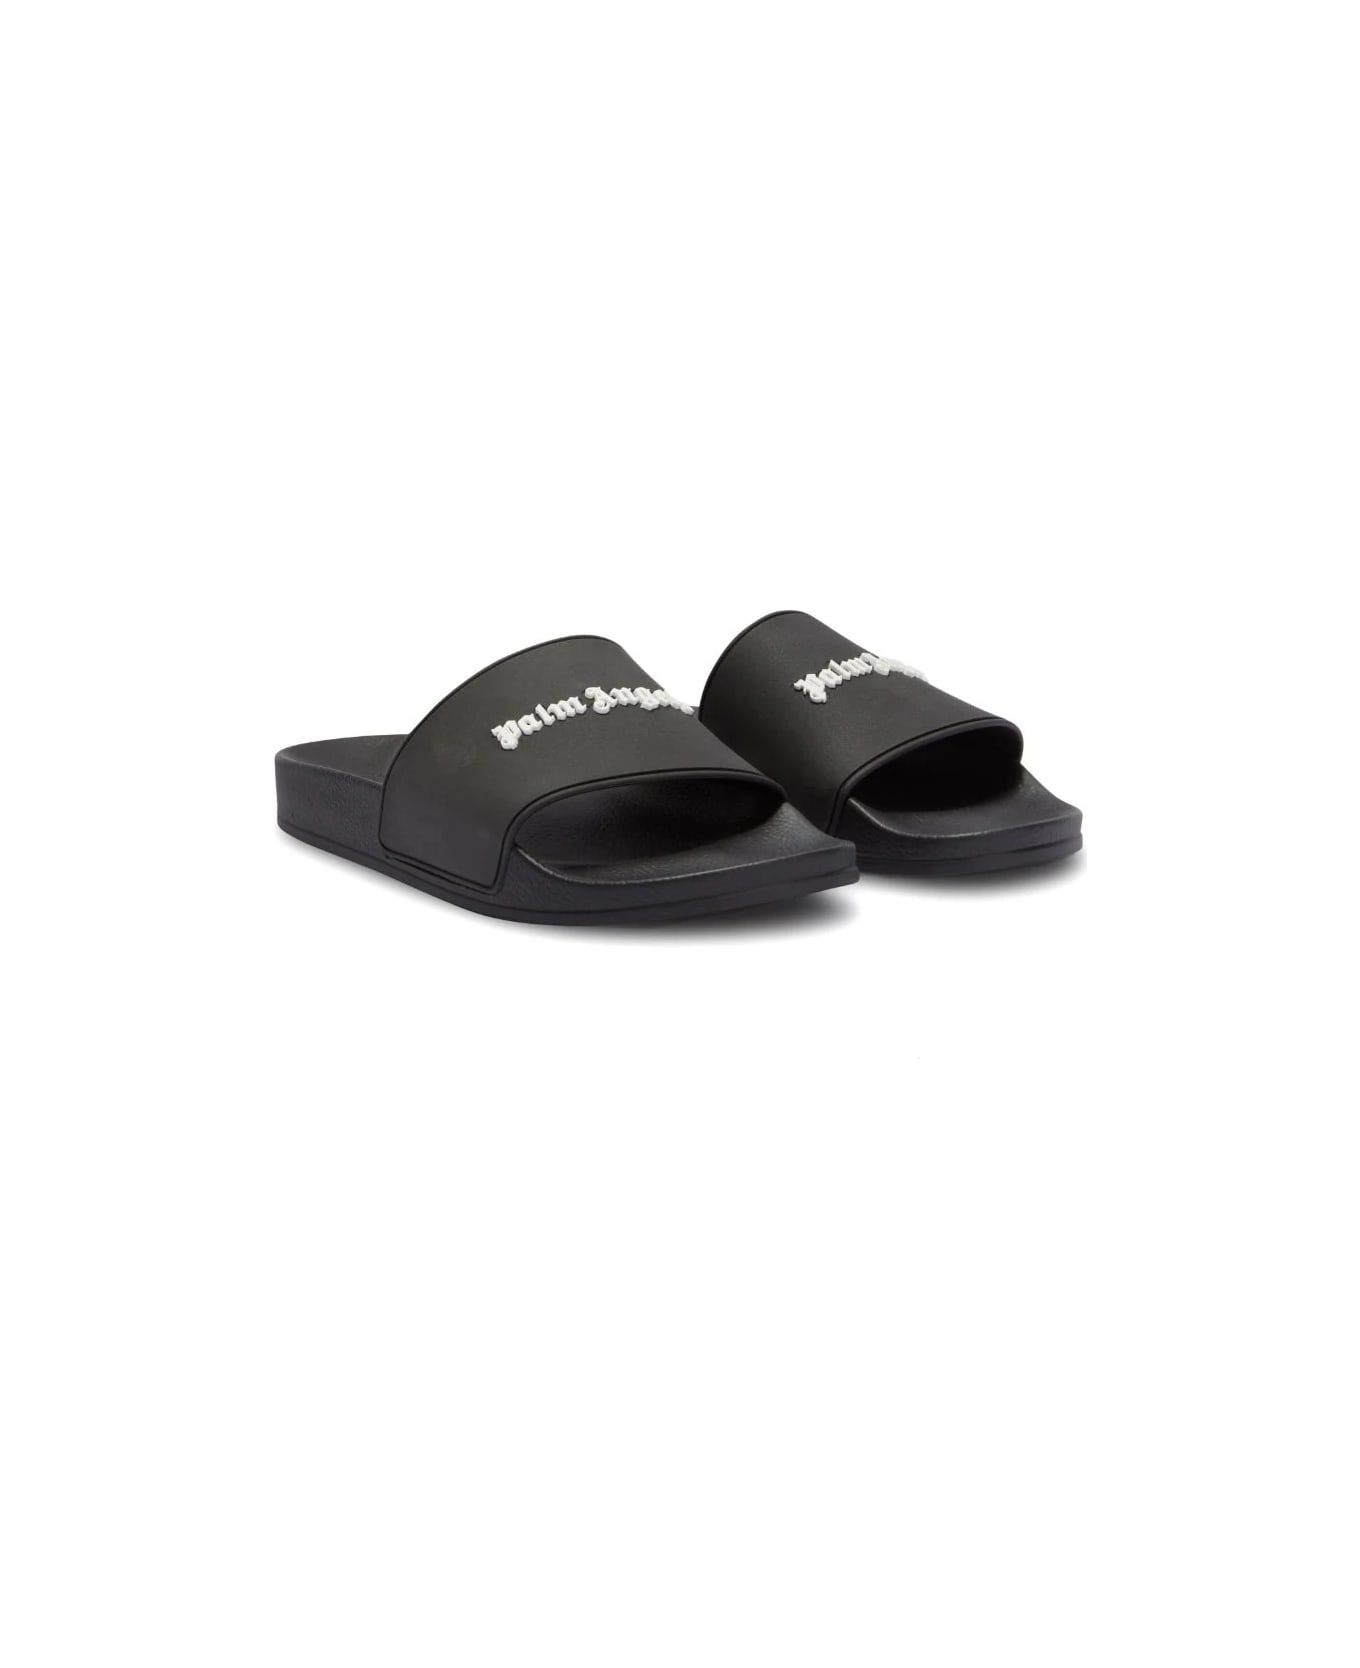 Palm Angels Black Slippers With White Logo - Black